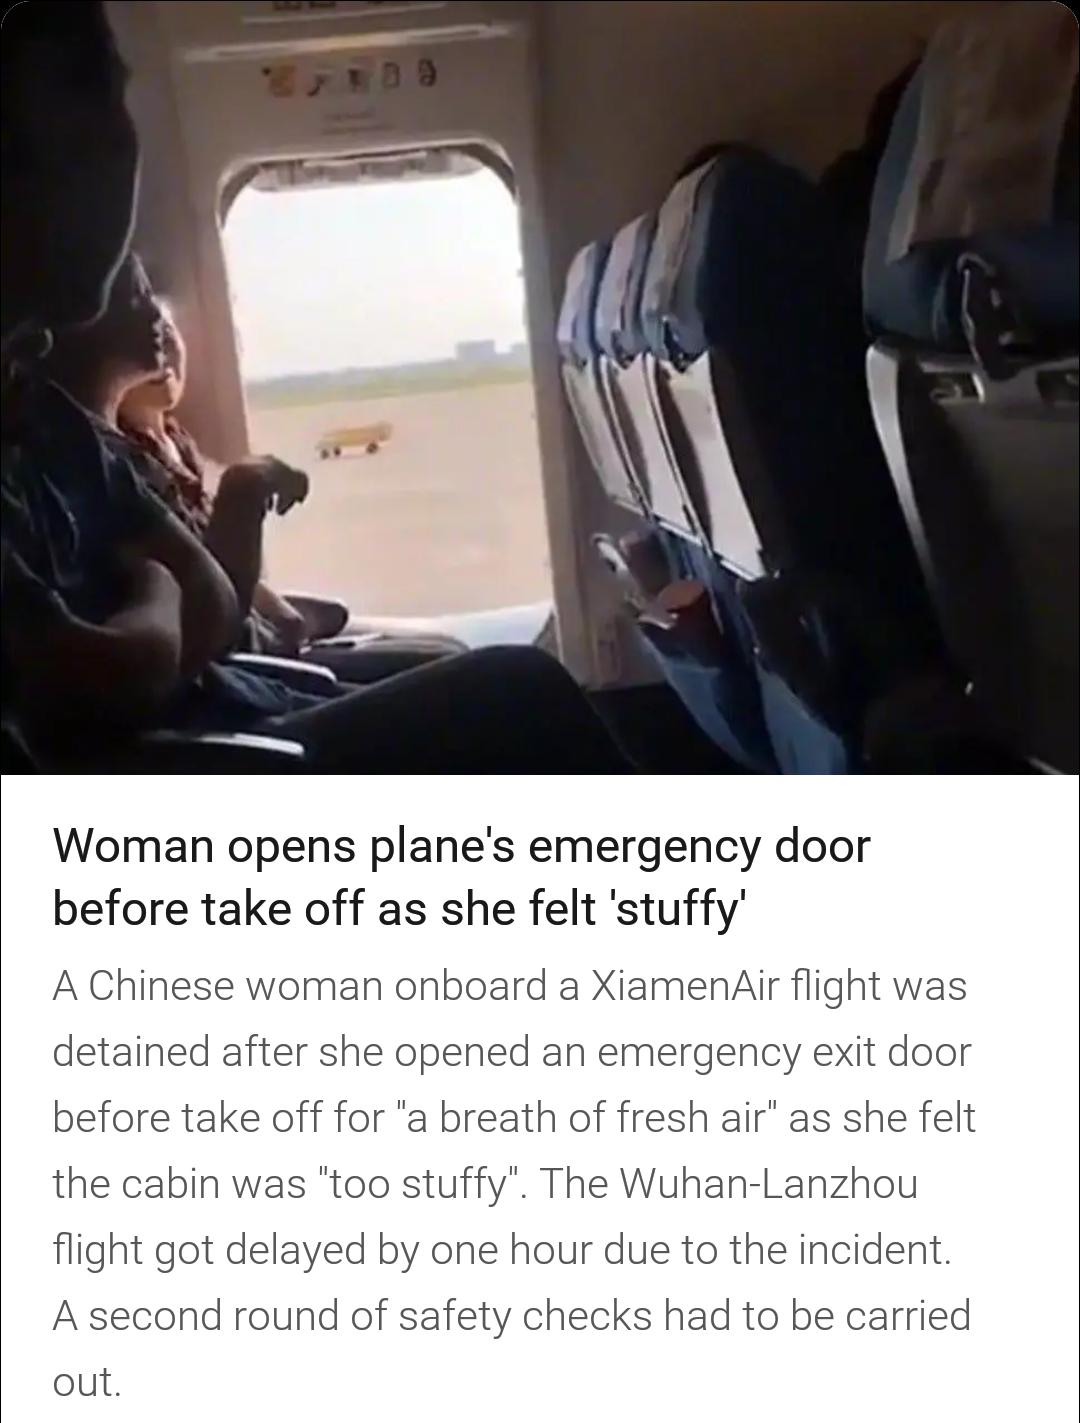 photo caption - Woman opens plane's emergency door before take off as she felt 'stuffy' A Chinese woman onboard a Xiamen Air flight was detained after she opened an emergency exit door before take off for'a breath of fresh air' as she felt the cabin was '